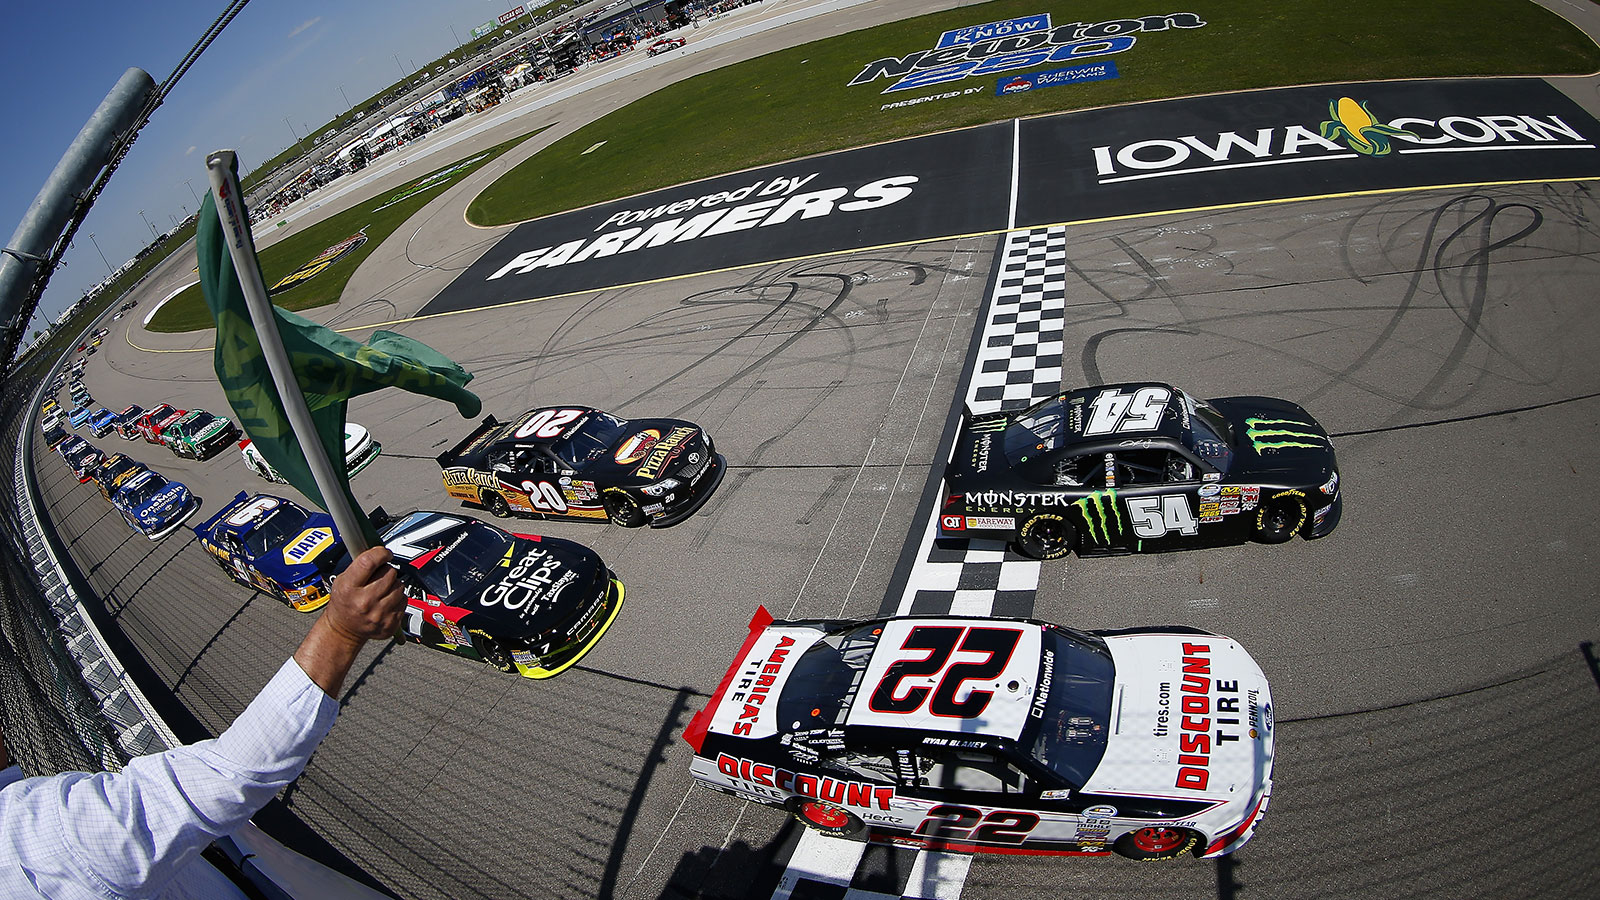 Opportunity seized: Hornish Jr. wins Newton 250 NNS race at Iowa